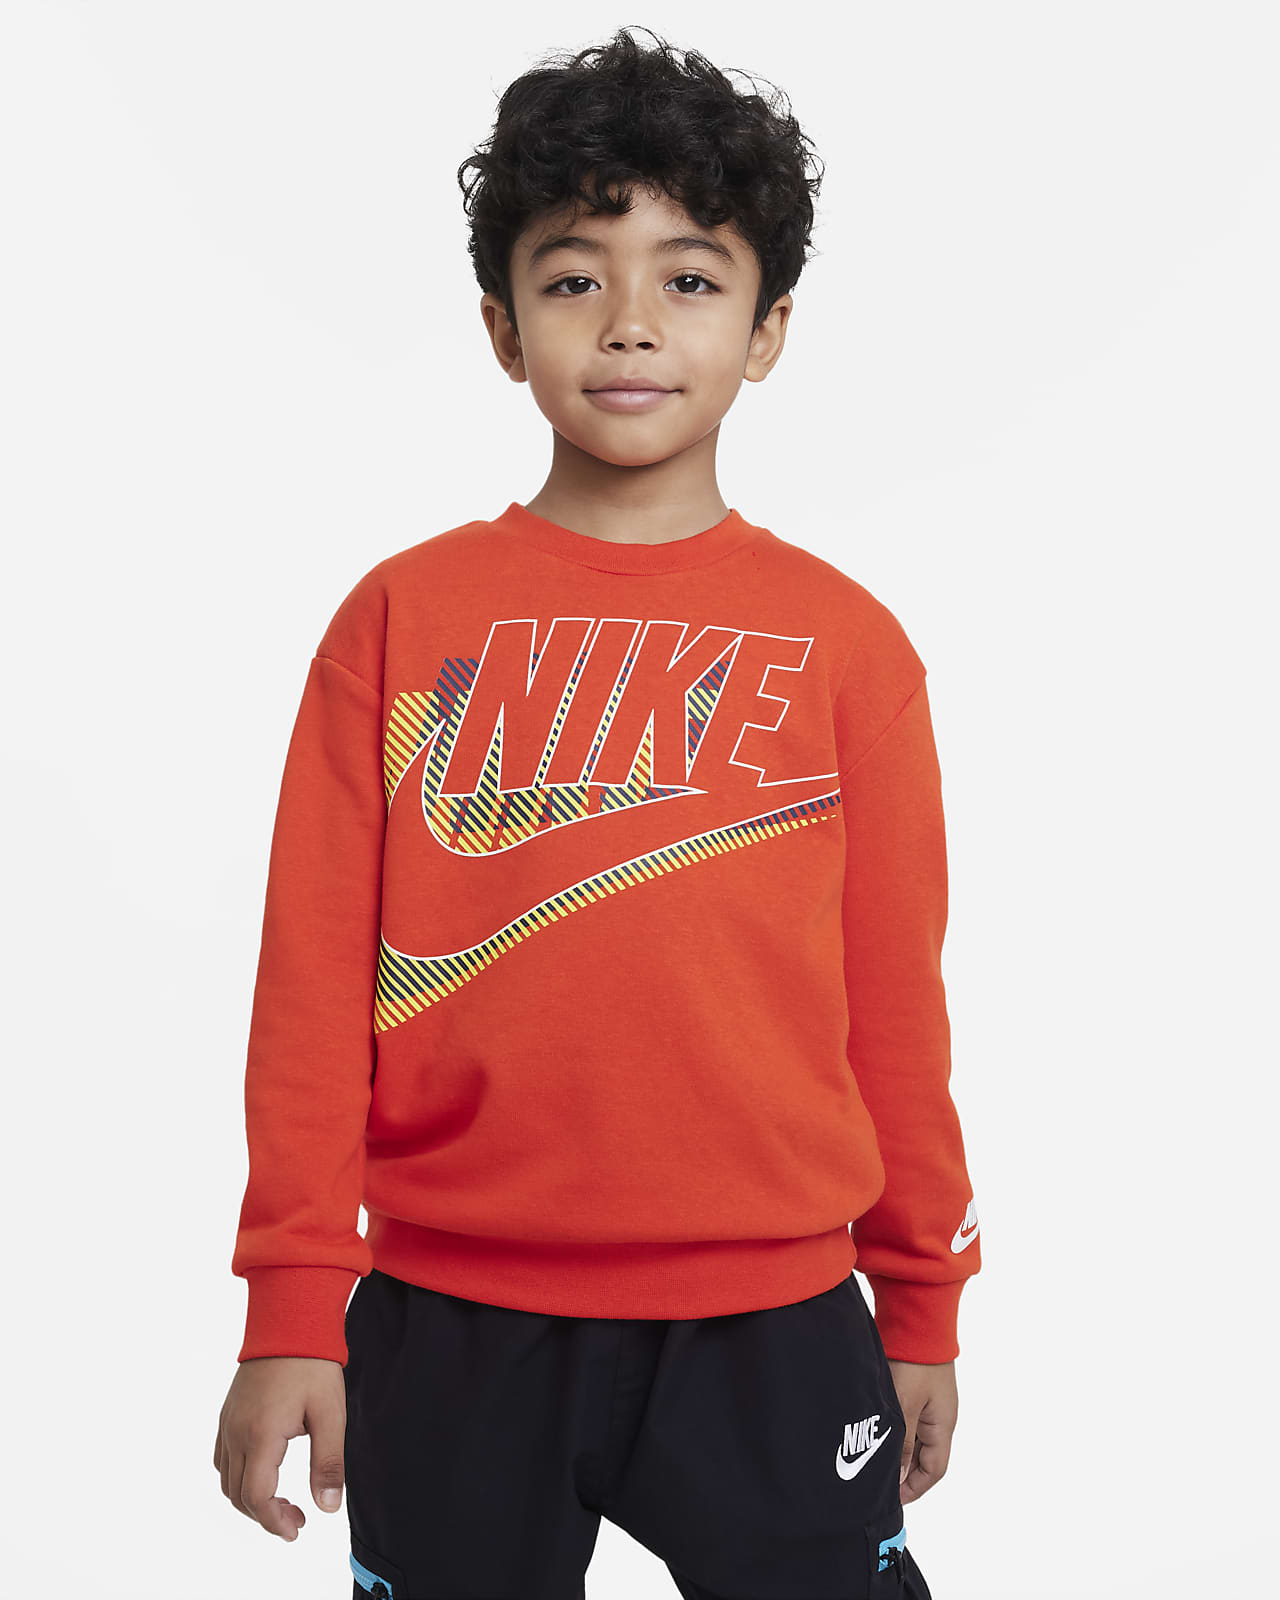 Nike Active Joy French Terry Crew Little Kids' Top